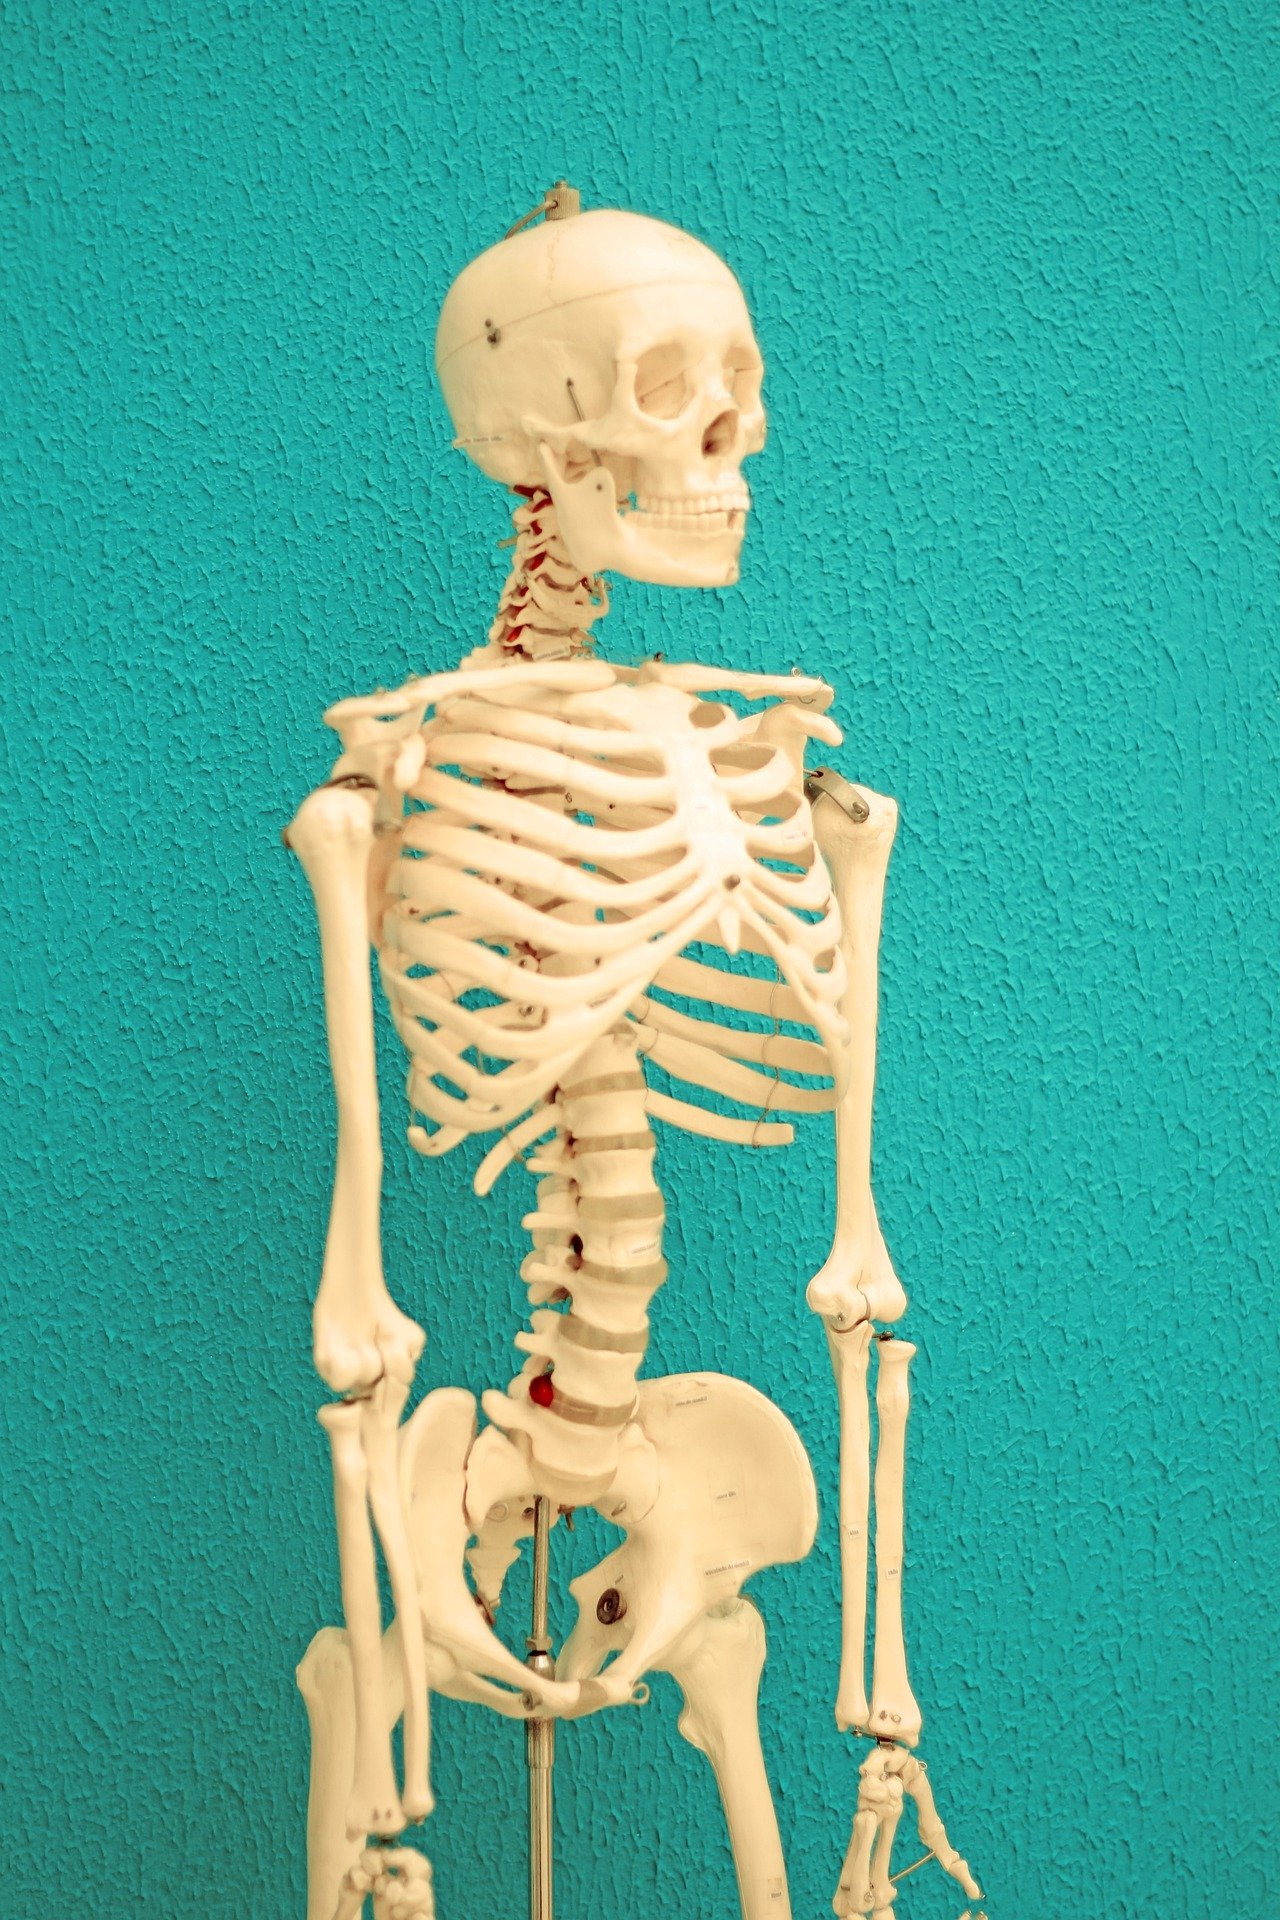 Pictured - A photo of a human skeleton against a blue wall | Source: Pixabay